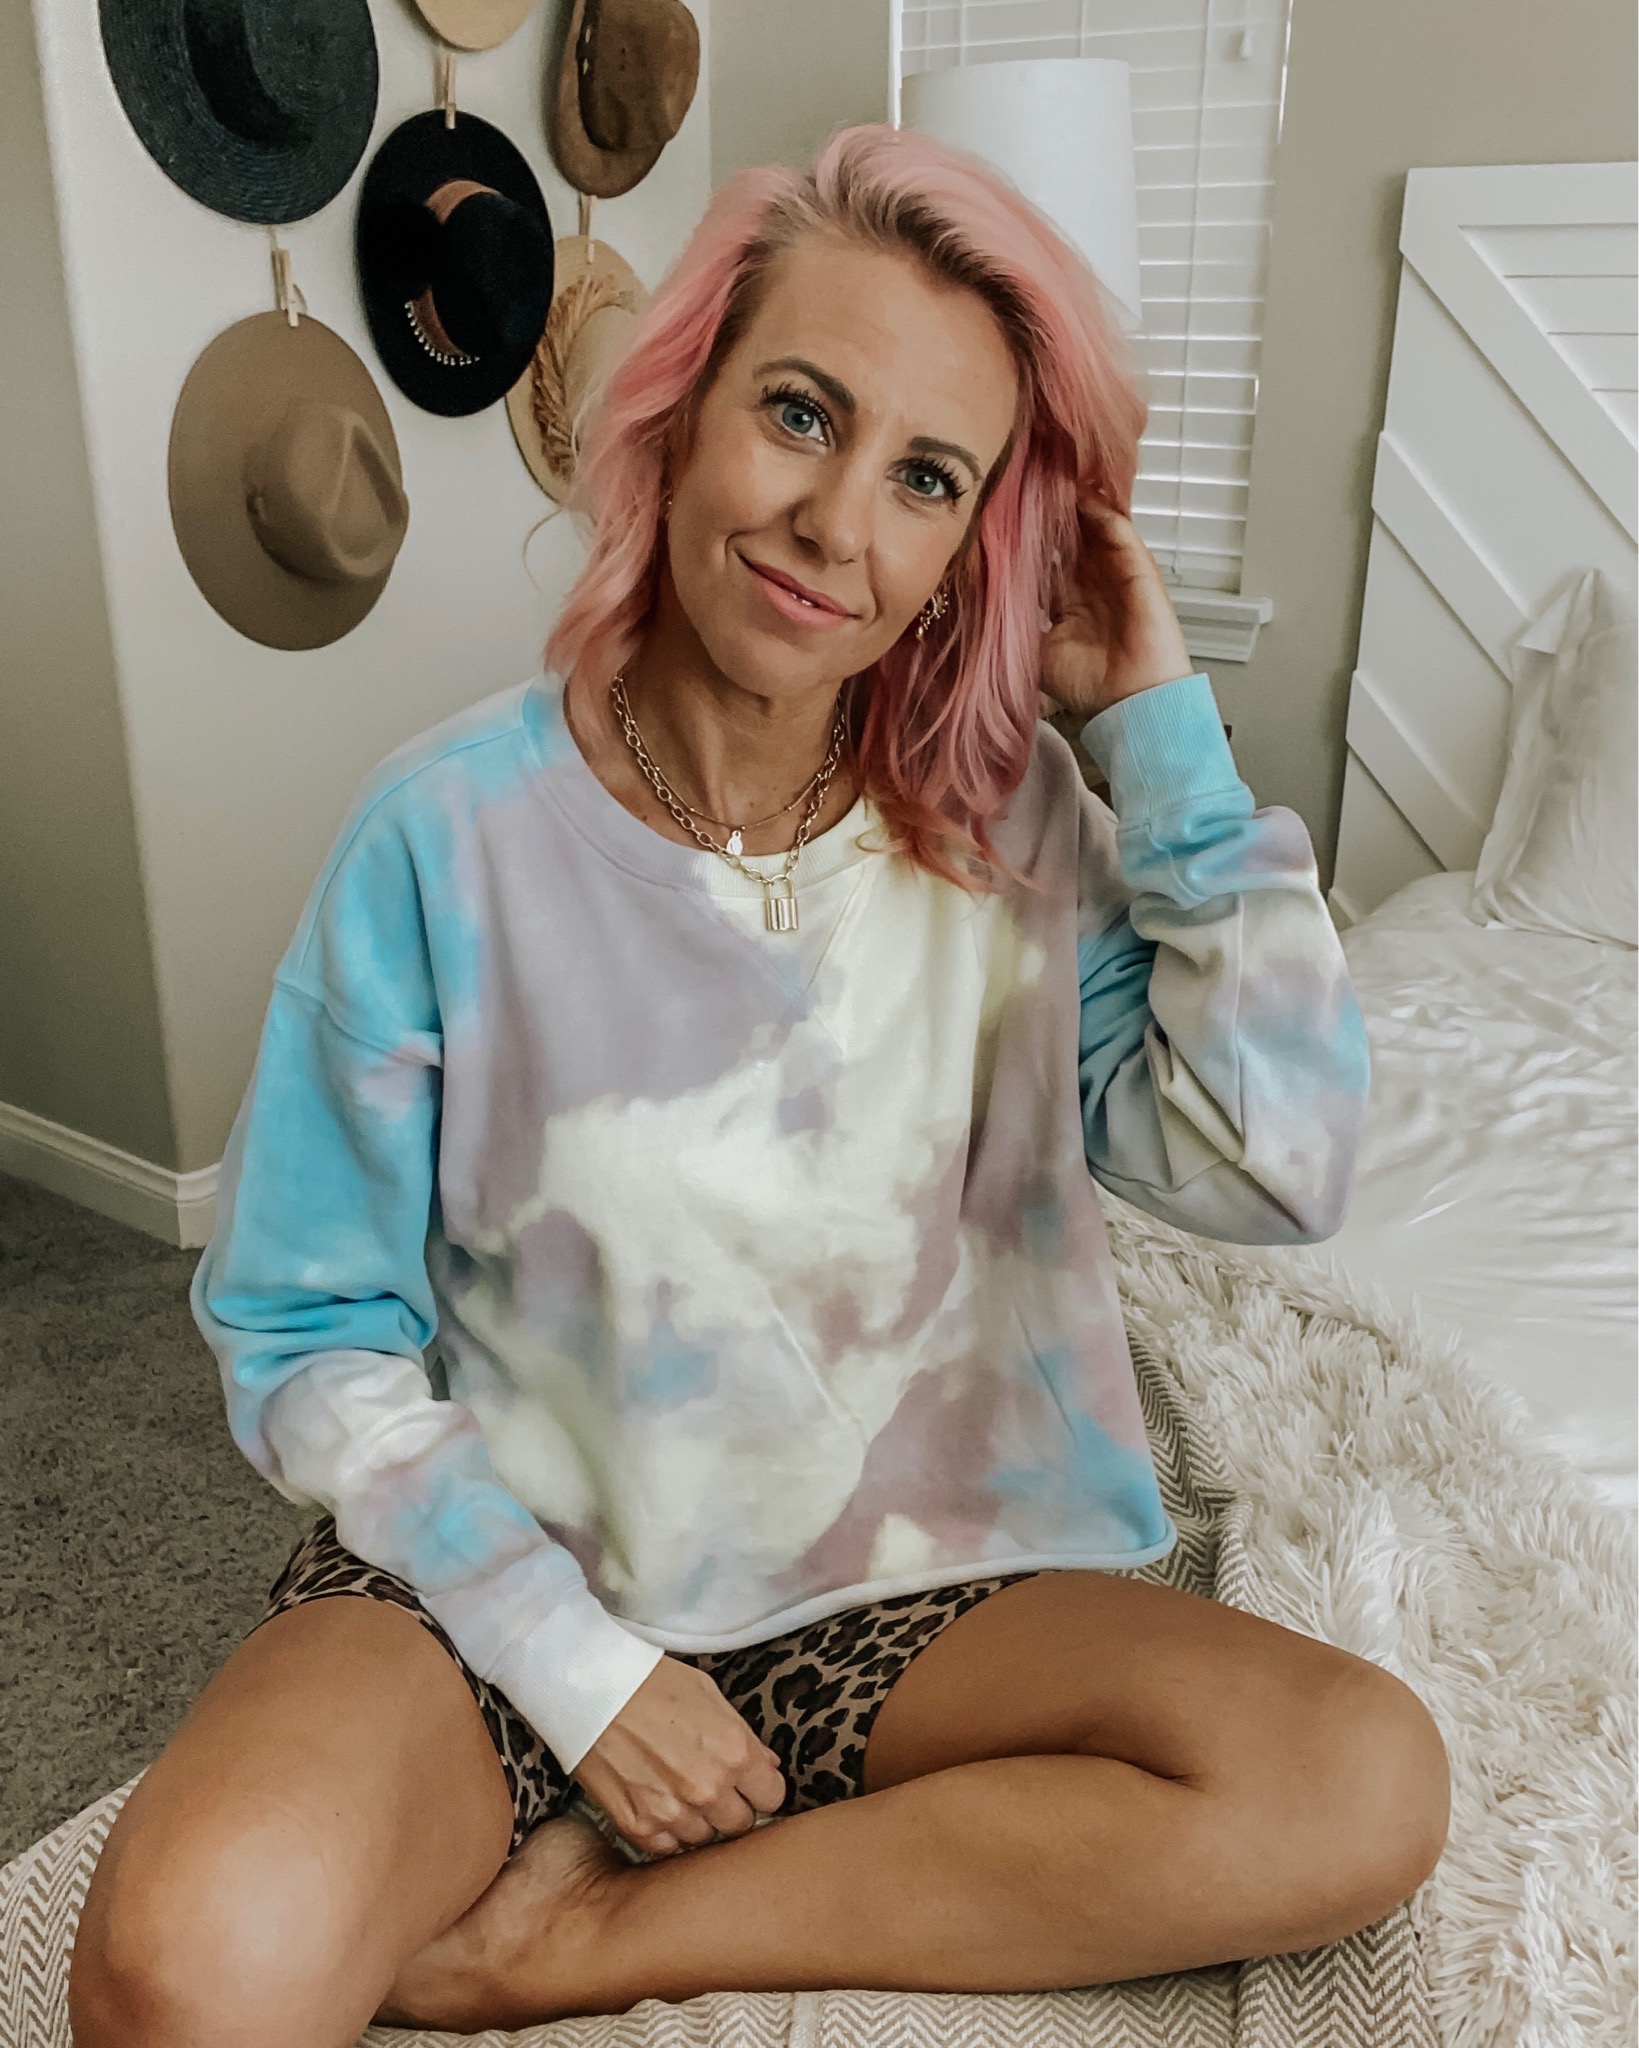 PINK HAIR DON'T CARE- WHAT I LEARNED FROM COLORING MY HAIR PINK- Jaclyn De Leon Style- Sharing all the details on what I used and what worked and didn't work with coloring my hair. Tips + tricks included